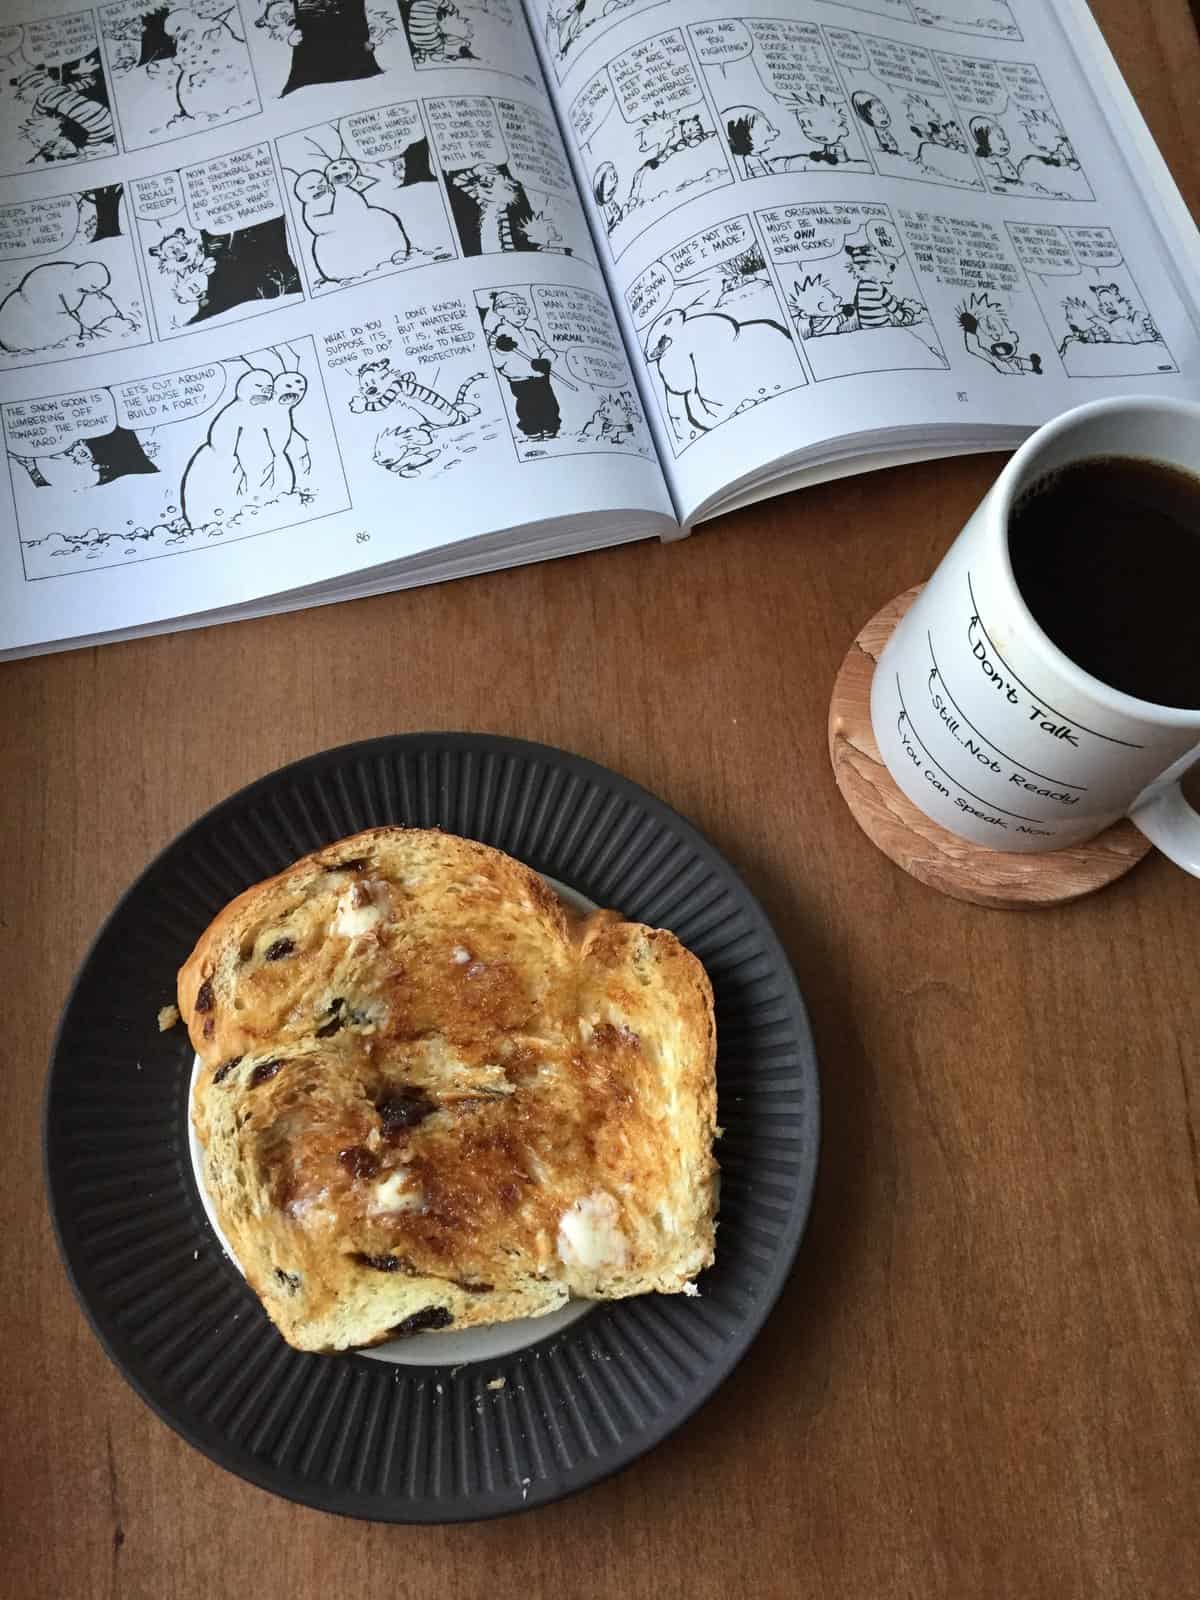 slice of toasted raisin challah on a plate with coffee cup and comic book.